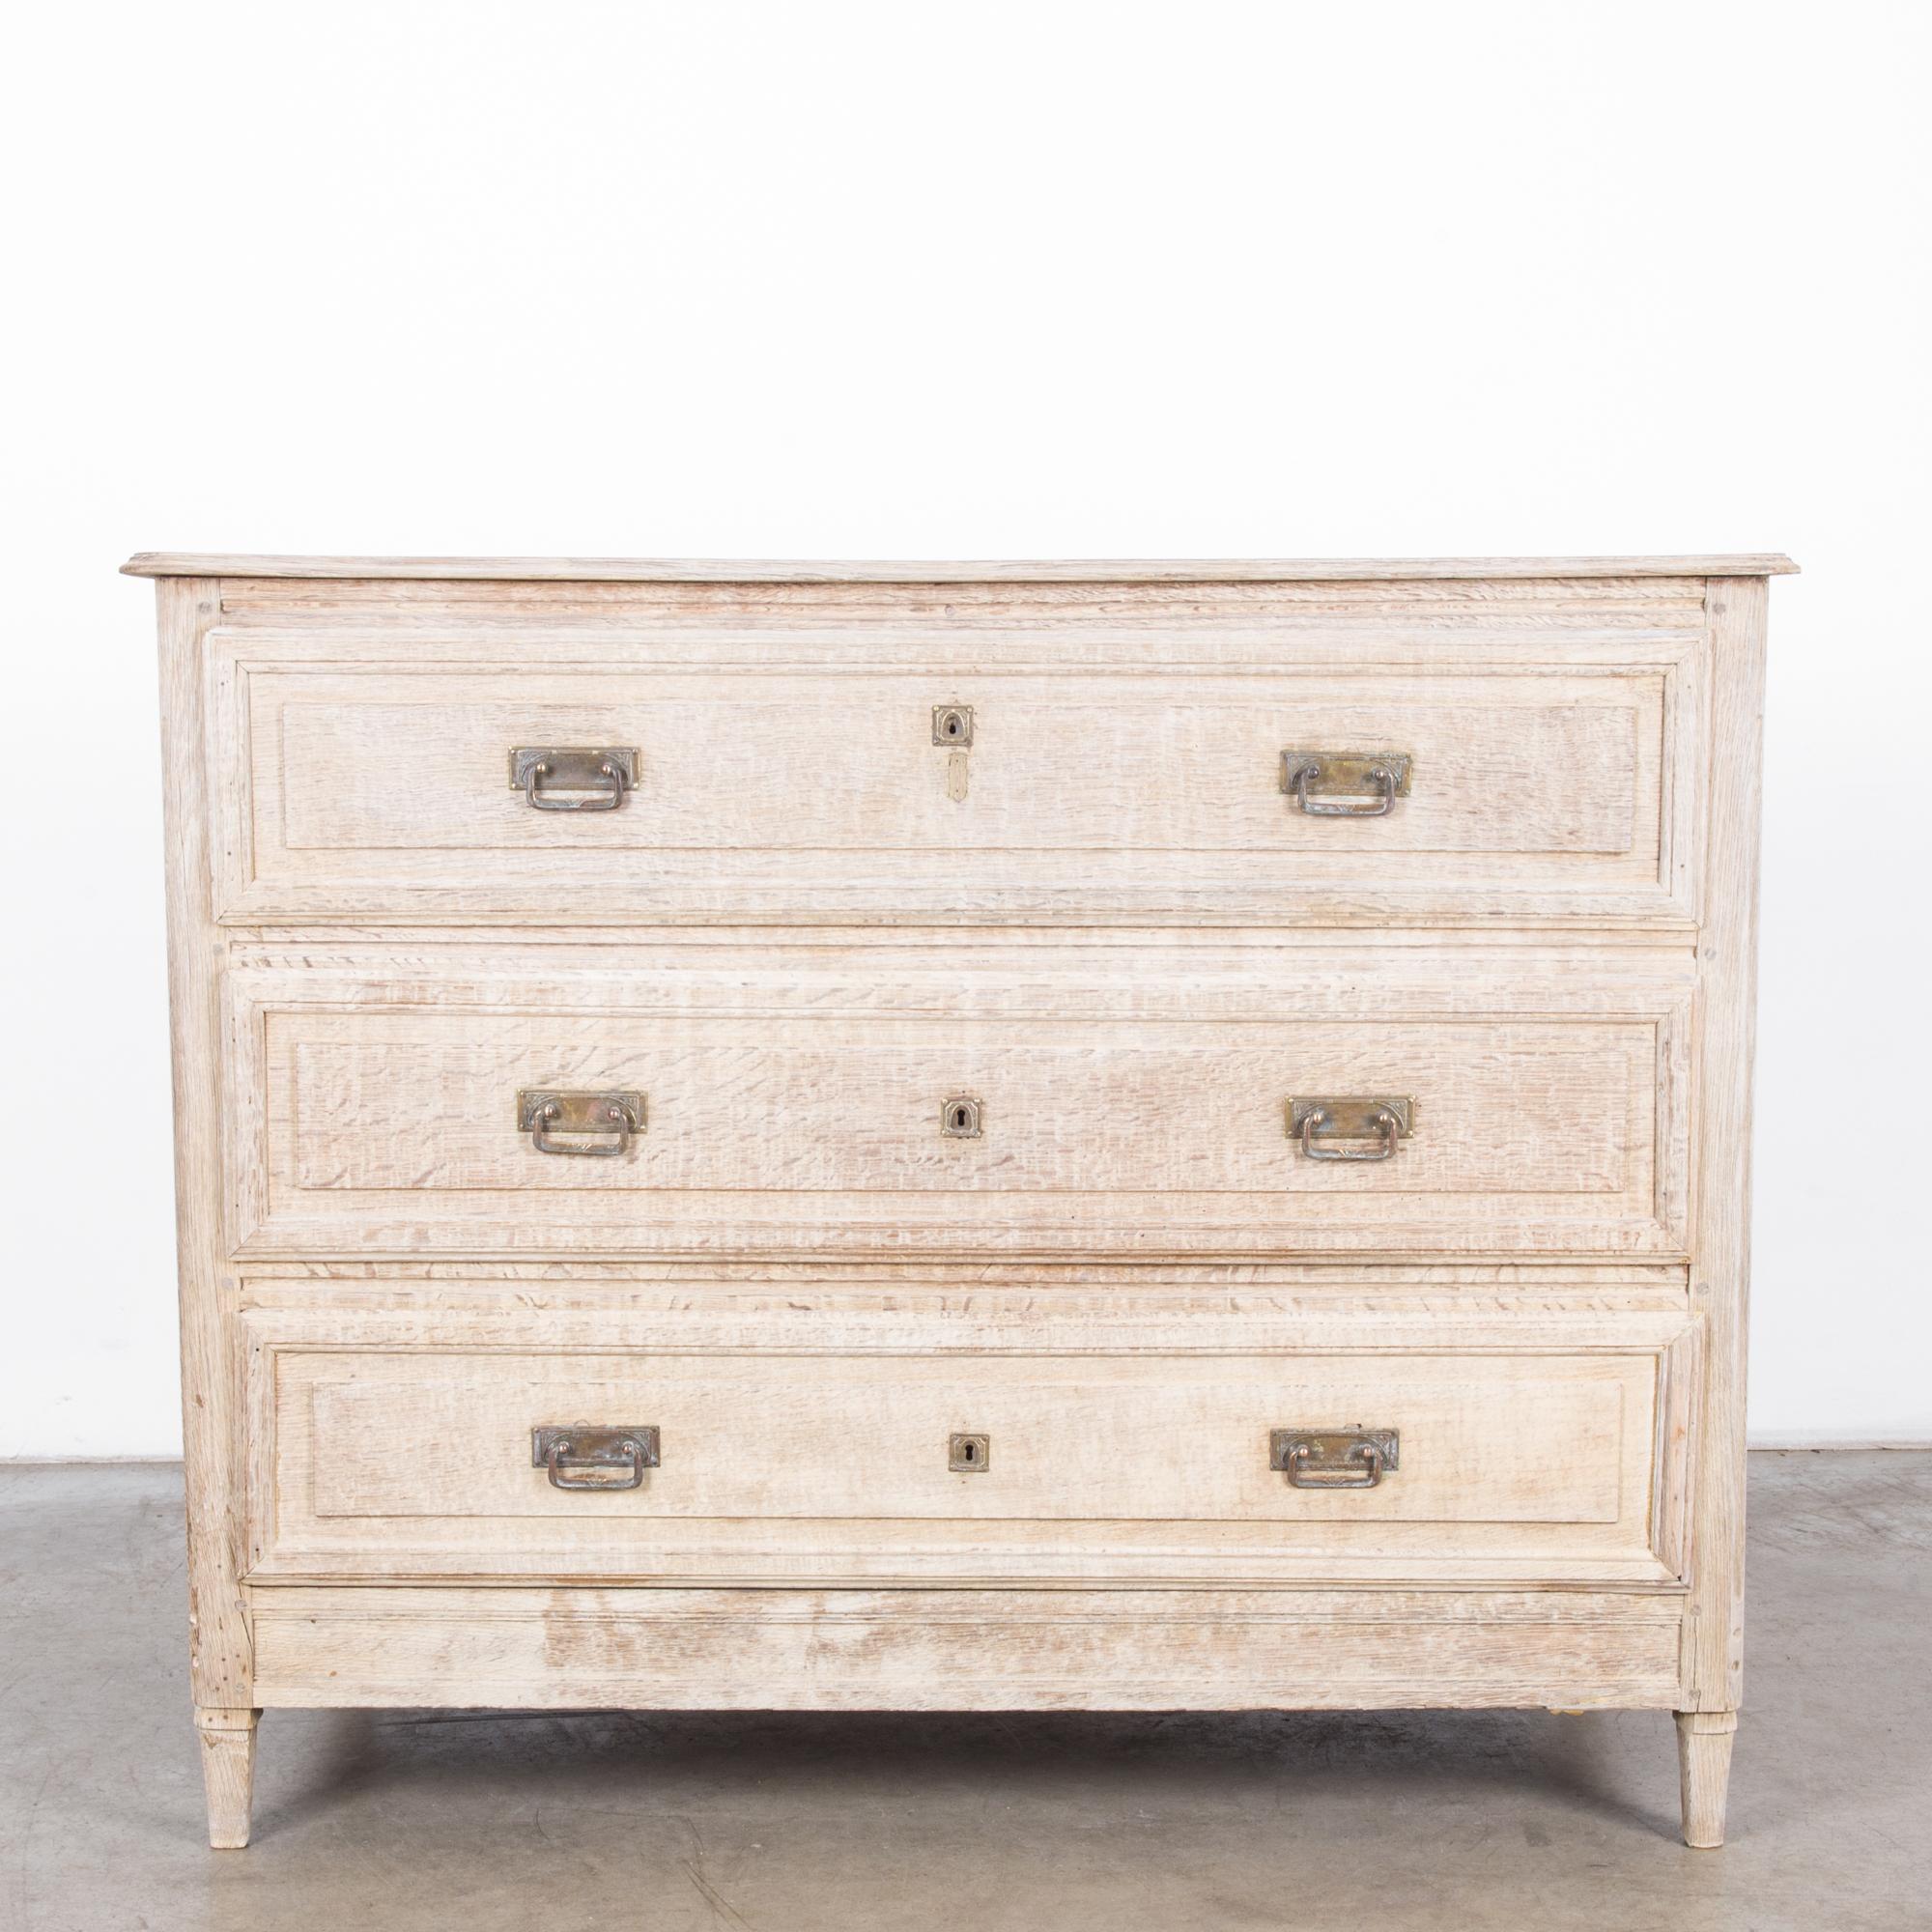 An antique bleached oak chest of drawers from France, circa 1880. The expert craftsmanship of this chest features three wide drawers with plated pulls and decorative keyholes. This impressive piece thrusts itself forward on four tapered legs. Its